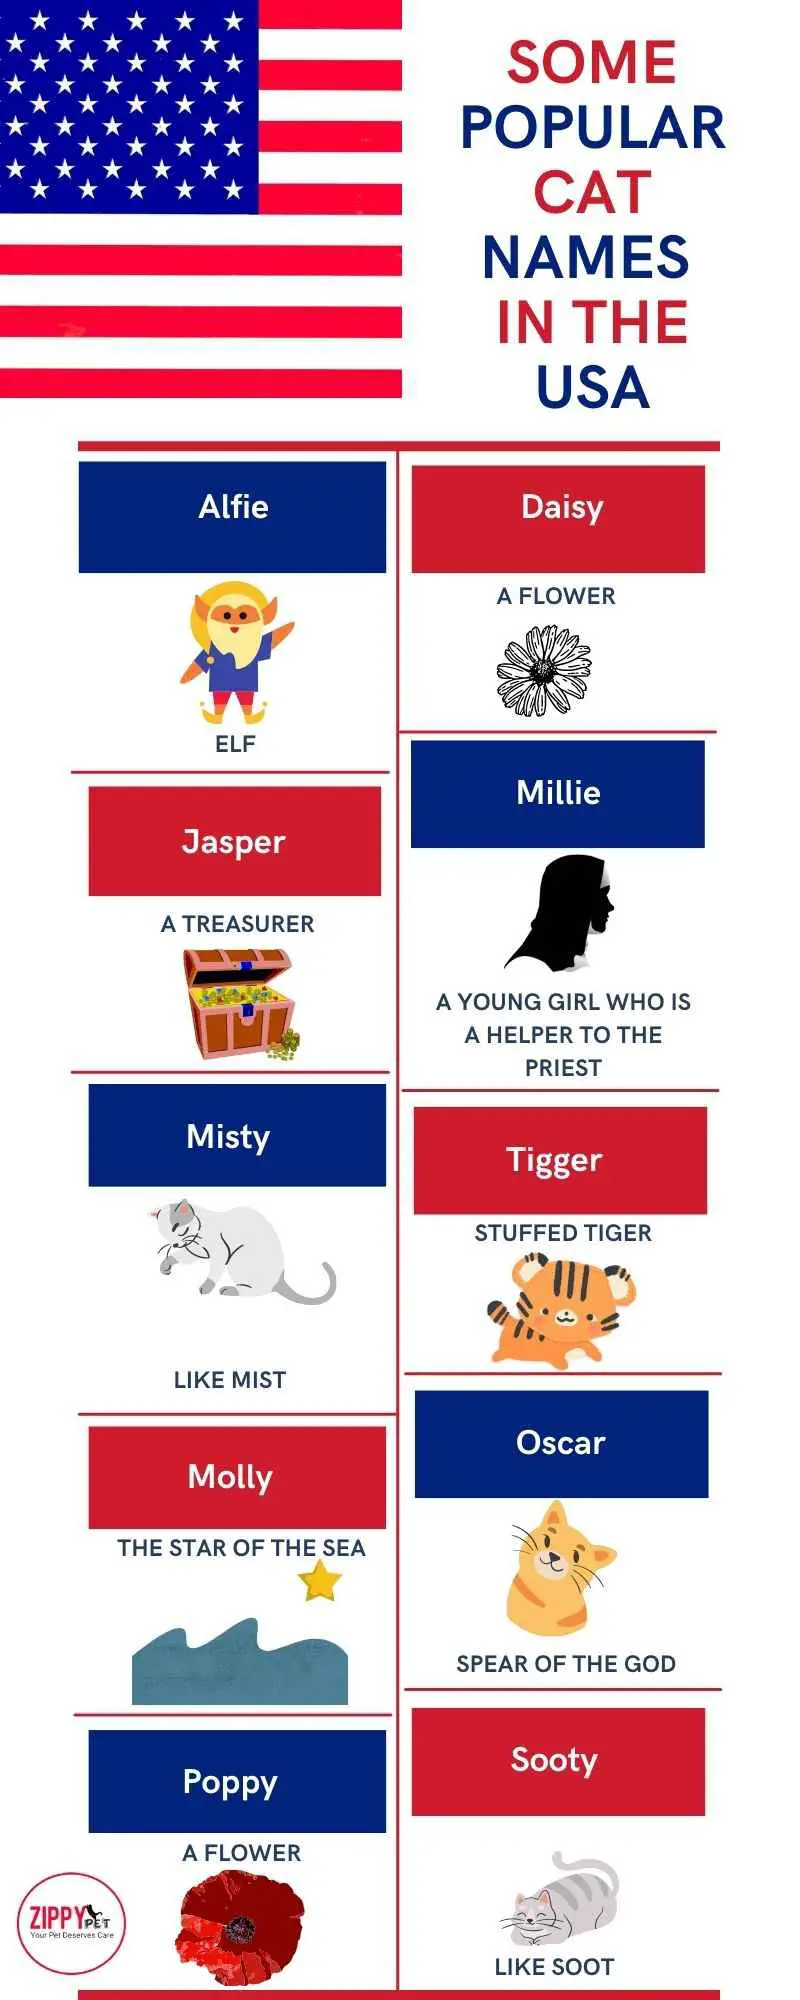 This inforgraphic shows the some popular cat names in the United States